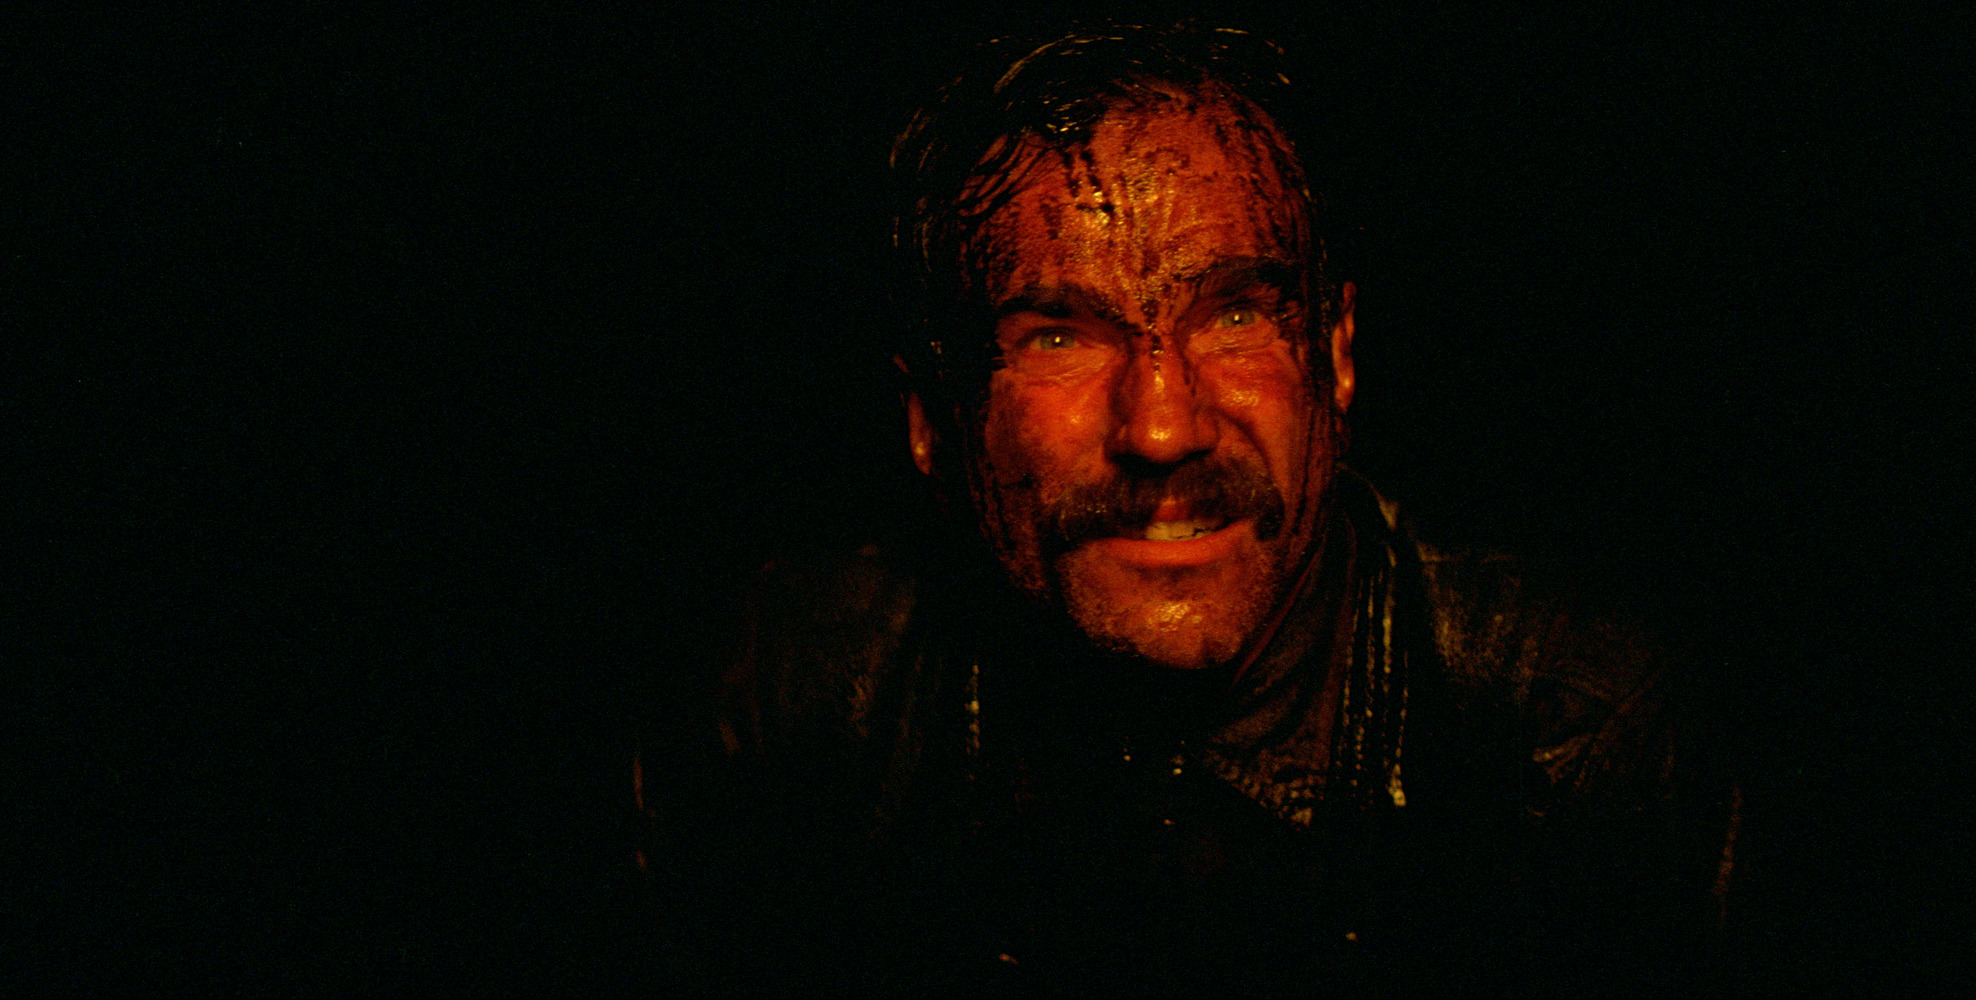 Daniel Day-Lewis in There WIll Be Blood